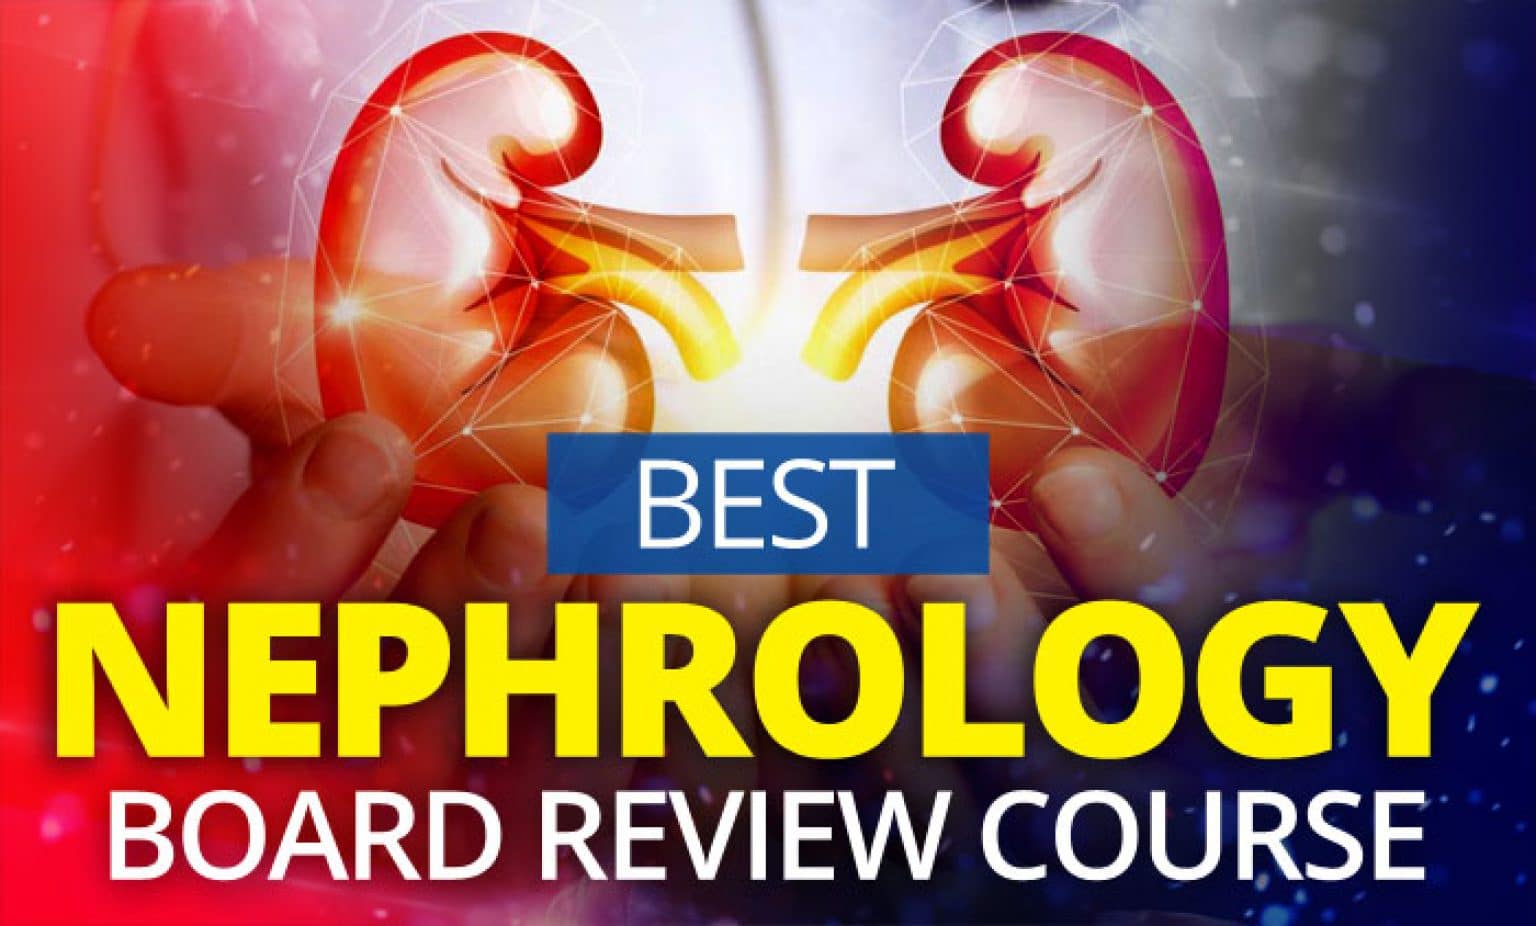 Best Nephrology Board Review Courses Crush Your Exam!